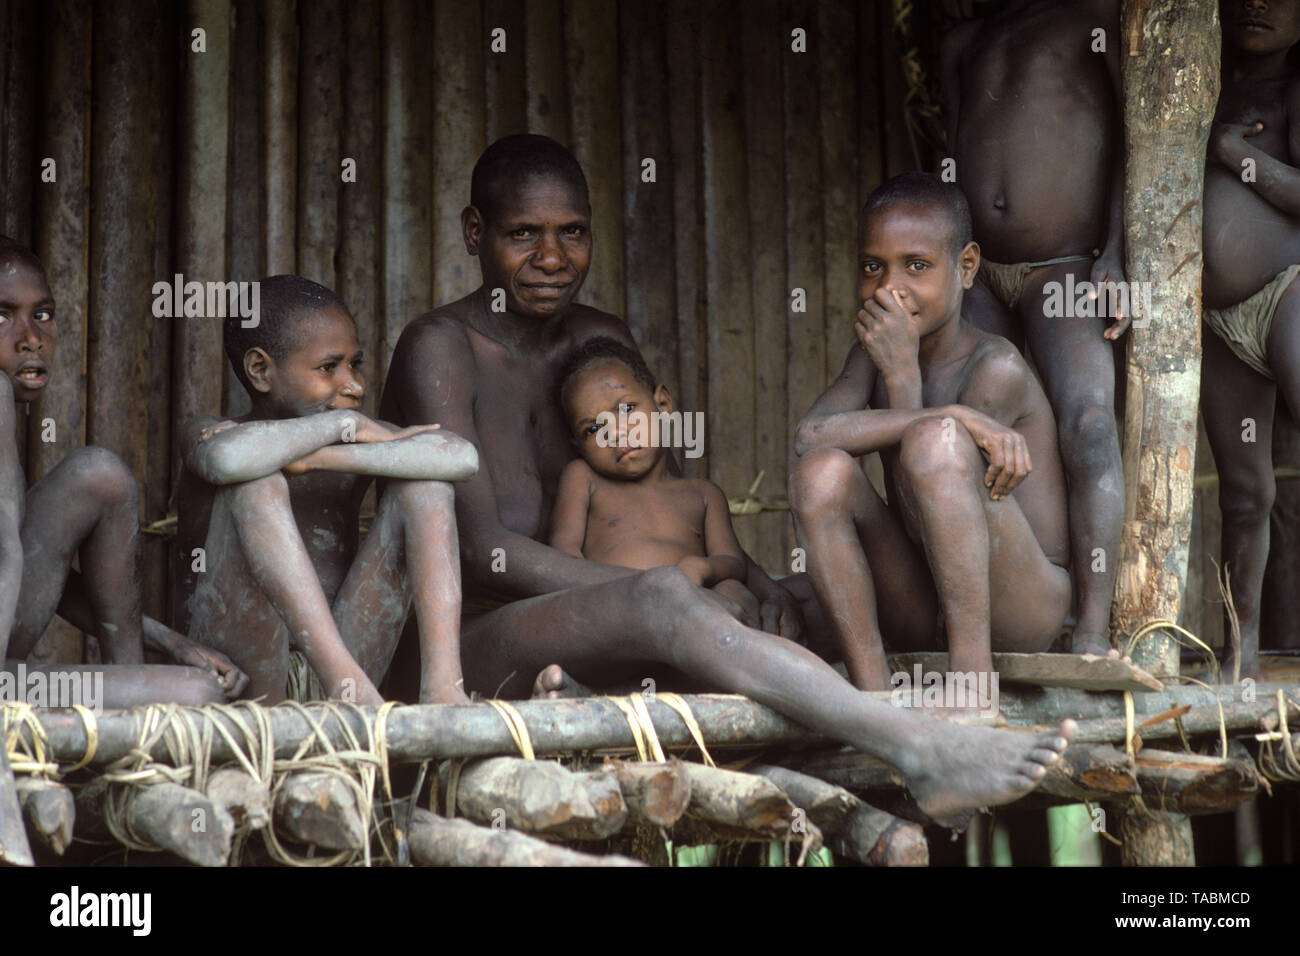 Asmat people: ethnic group living in the Papua province of Indonesia, along the Arafura Sea.  Mother and children, Village of Pirien. Photograph taken Stock Photo